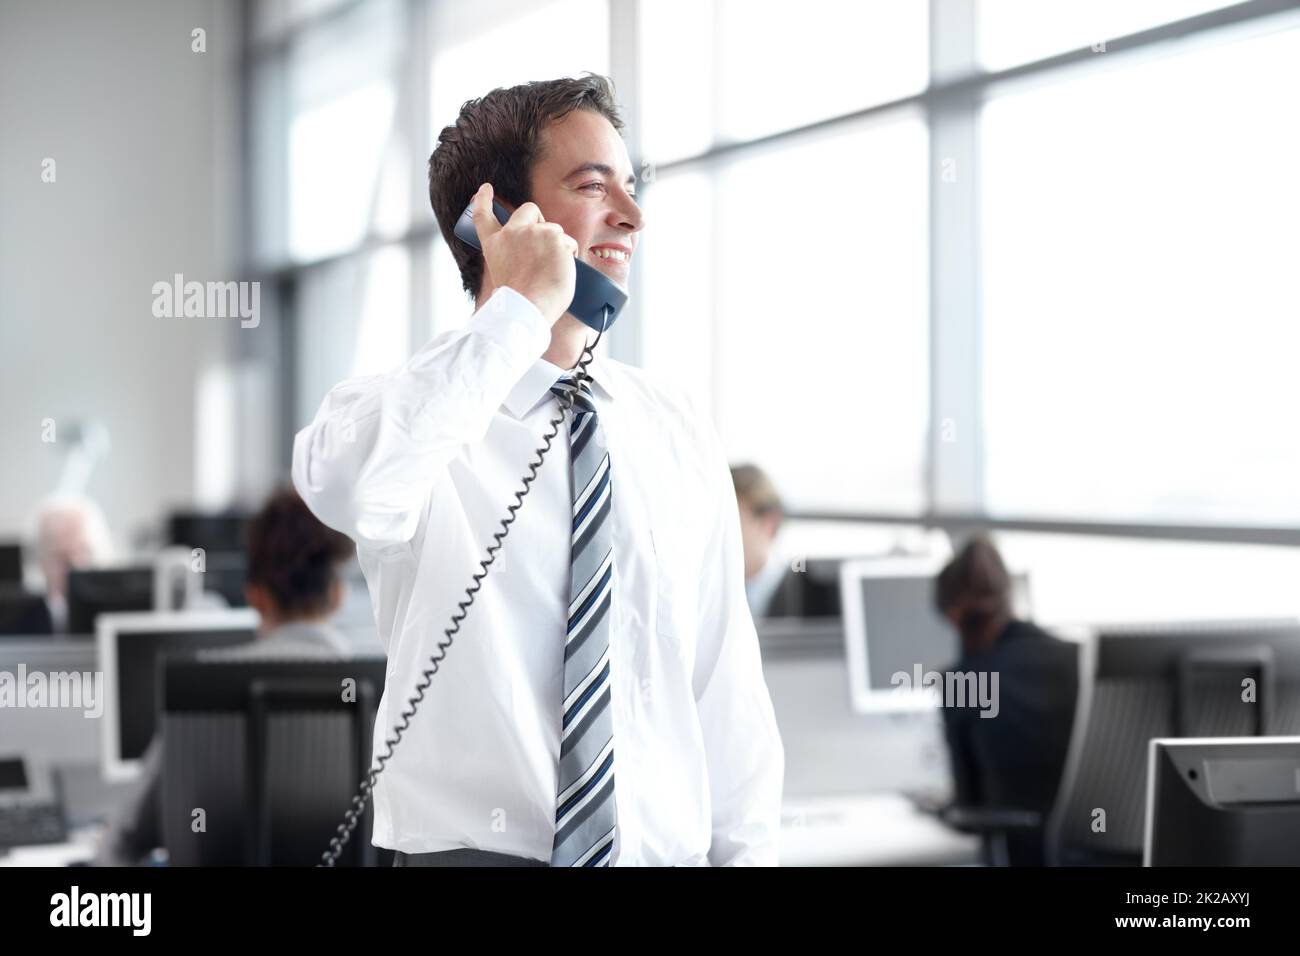 Closing that deal. Young business executive standing in the office while on the phone. Stock Photo